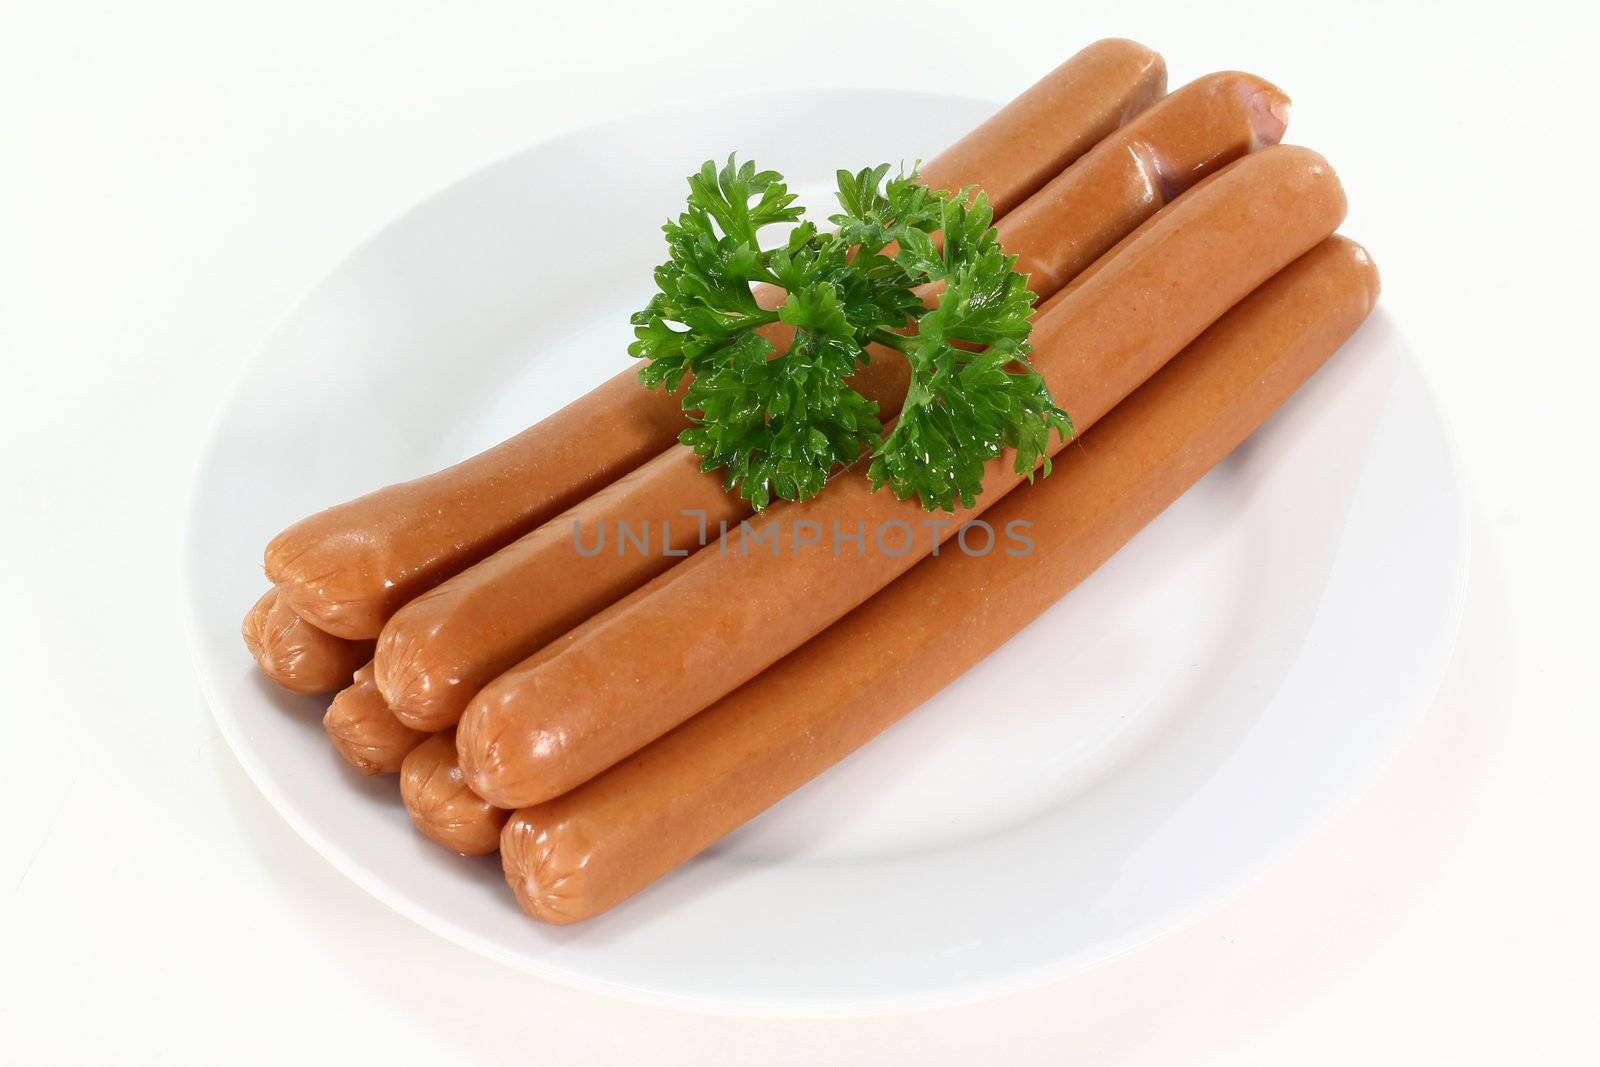 Vienna sausages and parsley on a white plate